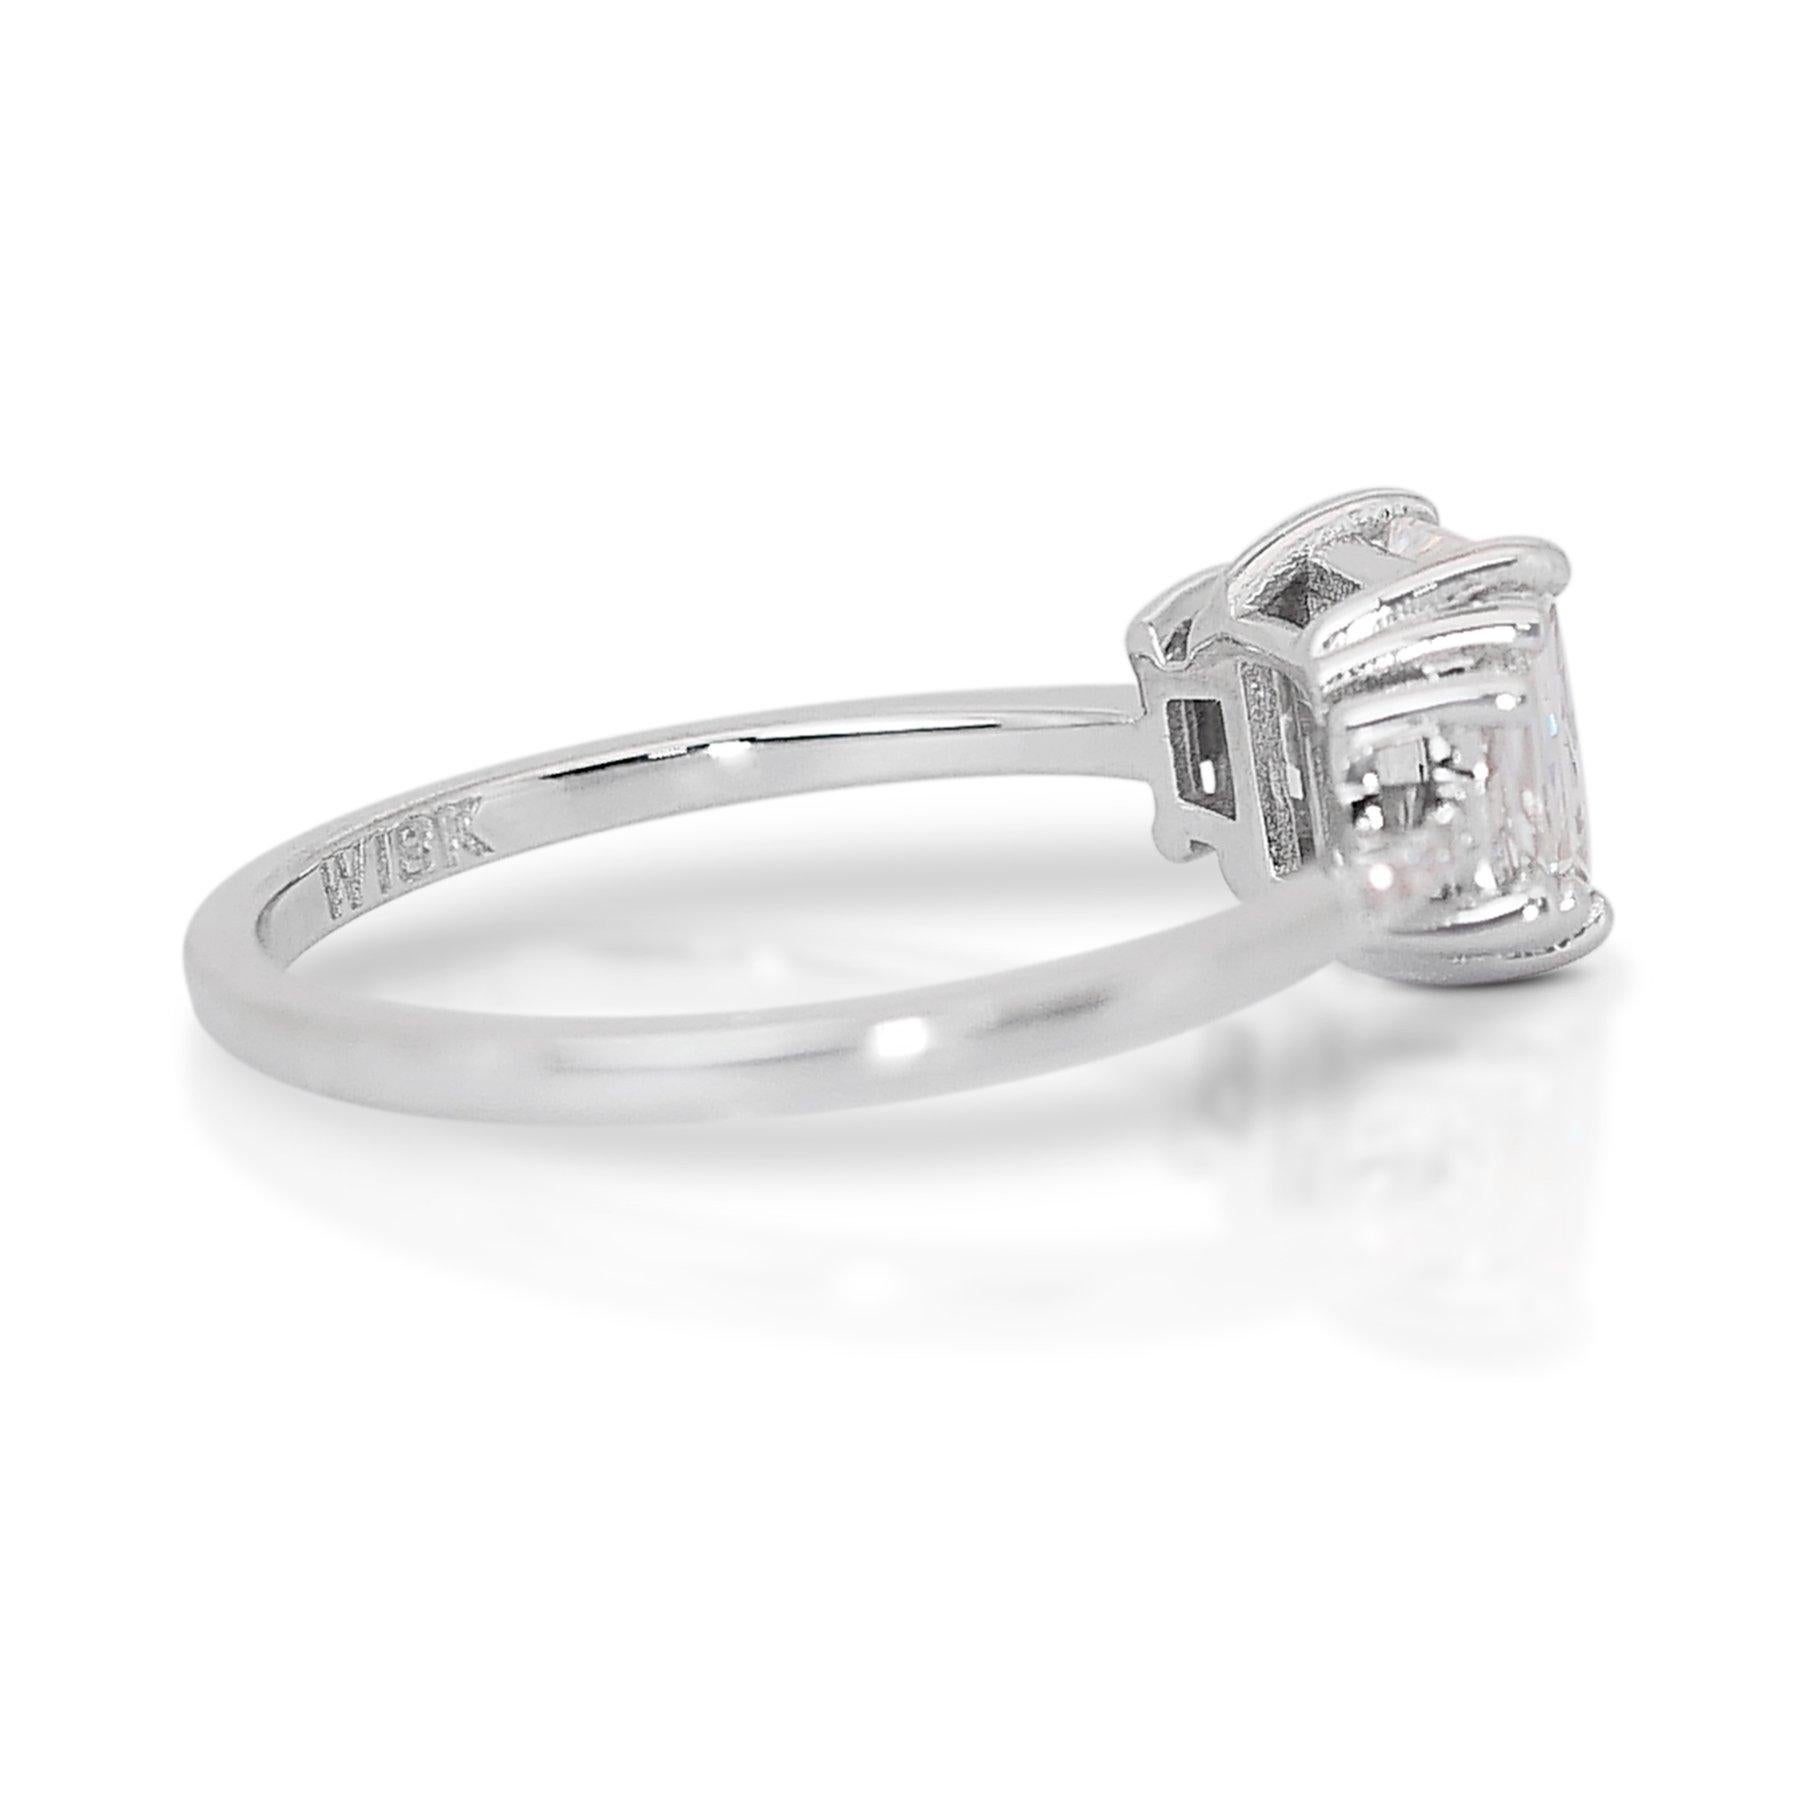 Radiant Cut Dazzling 1.32ct Diamond 3-Stone Ring in 18K White Gold - GIA Certified For Sale